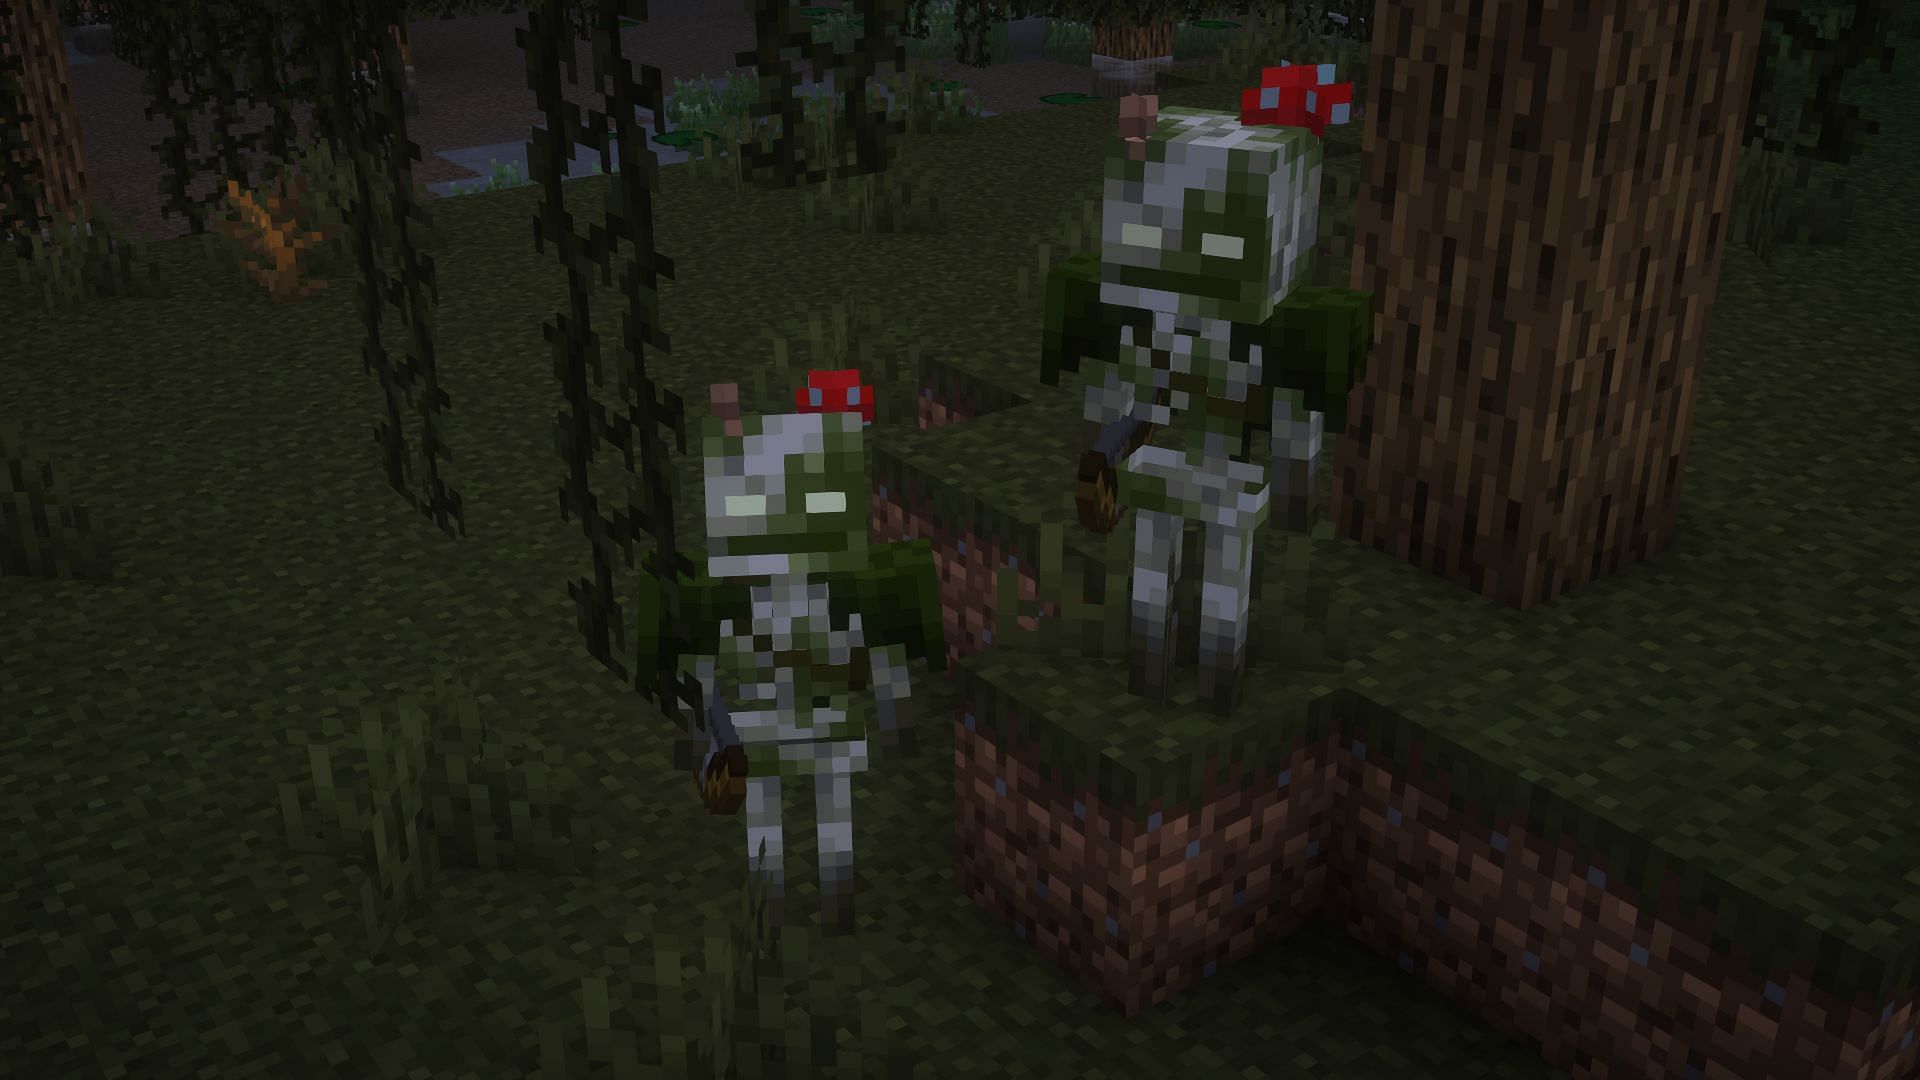 Two bogged skeletons in the game (Image via Mojang Studios)